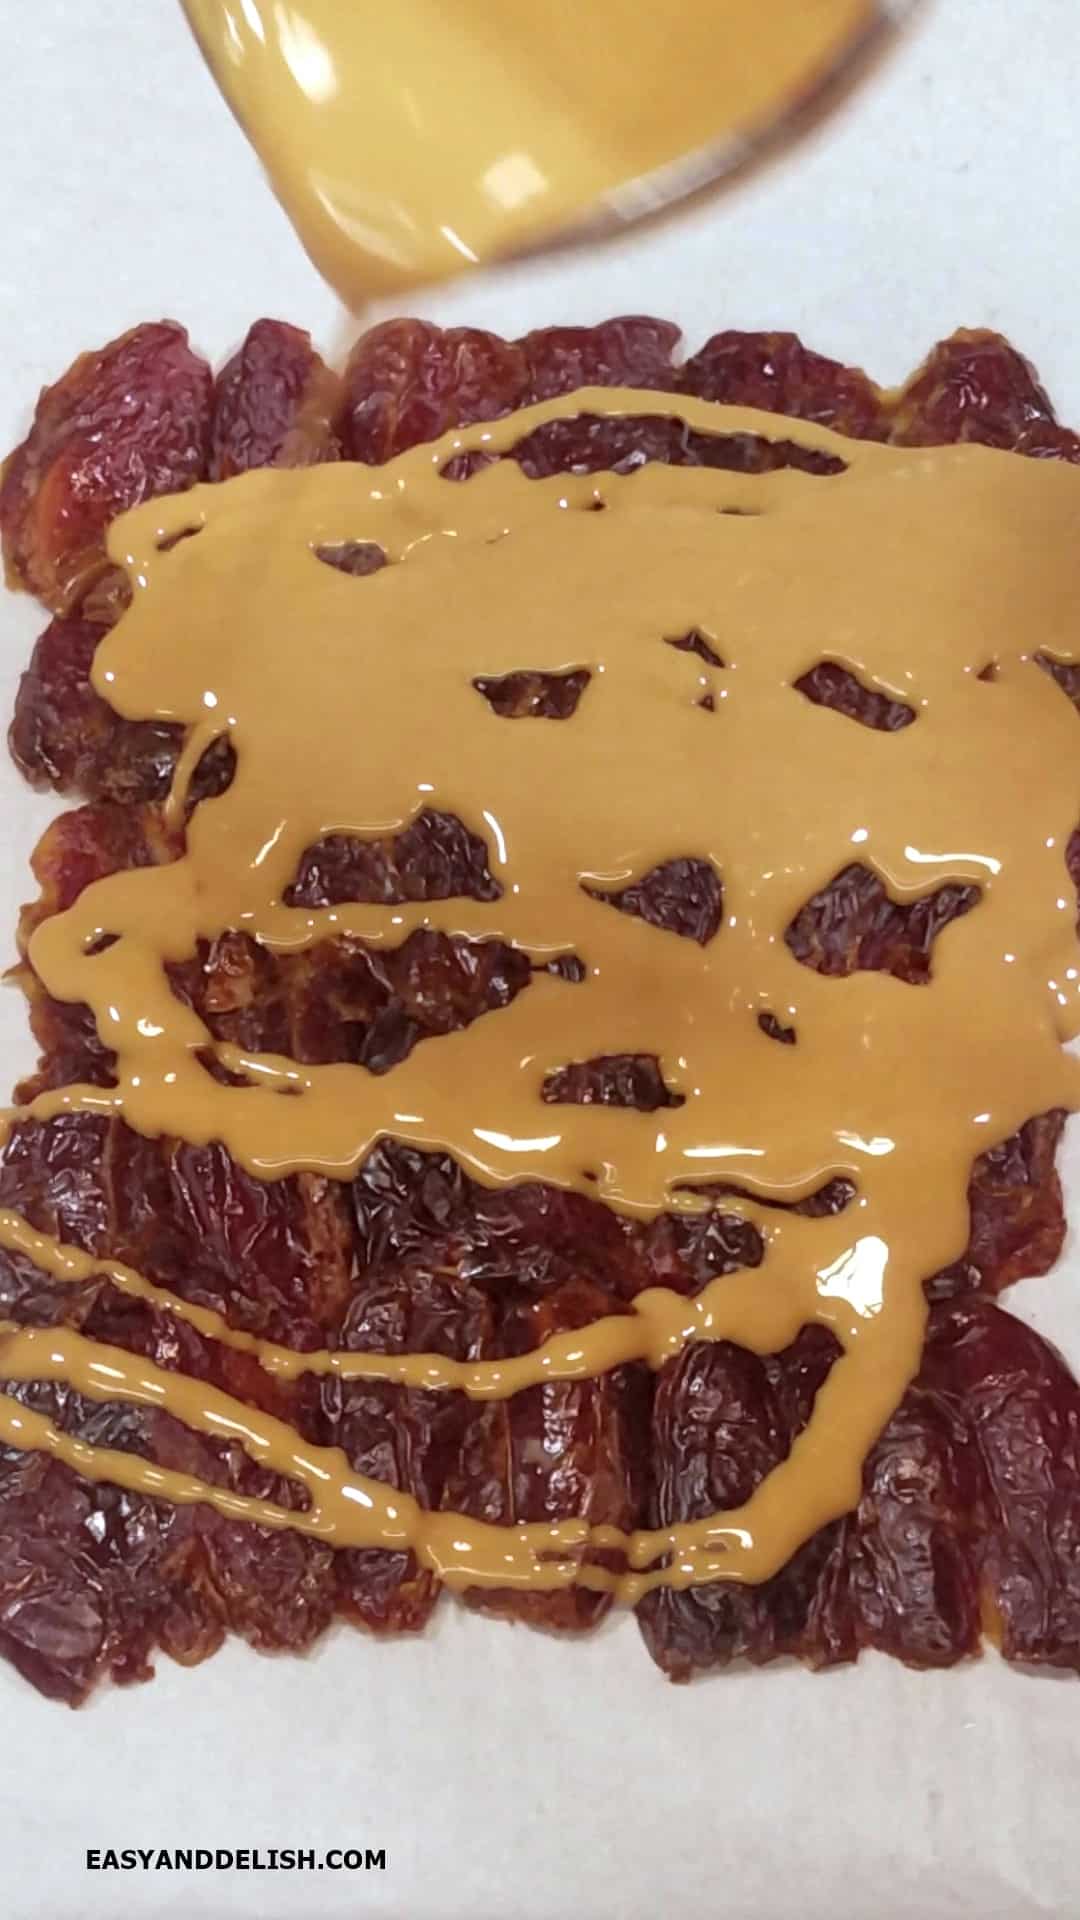 Melted peanut butter poured on top of a layer of dried fruits.